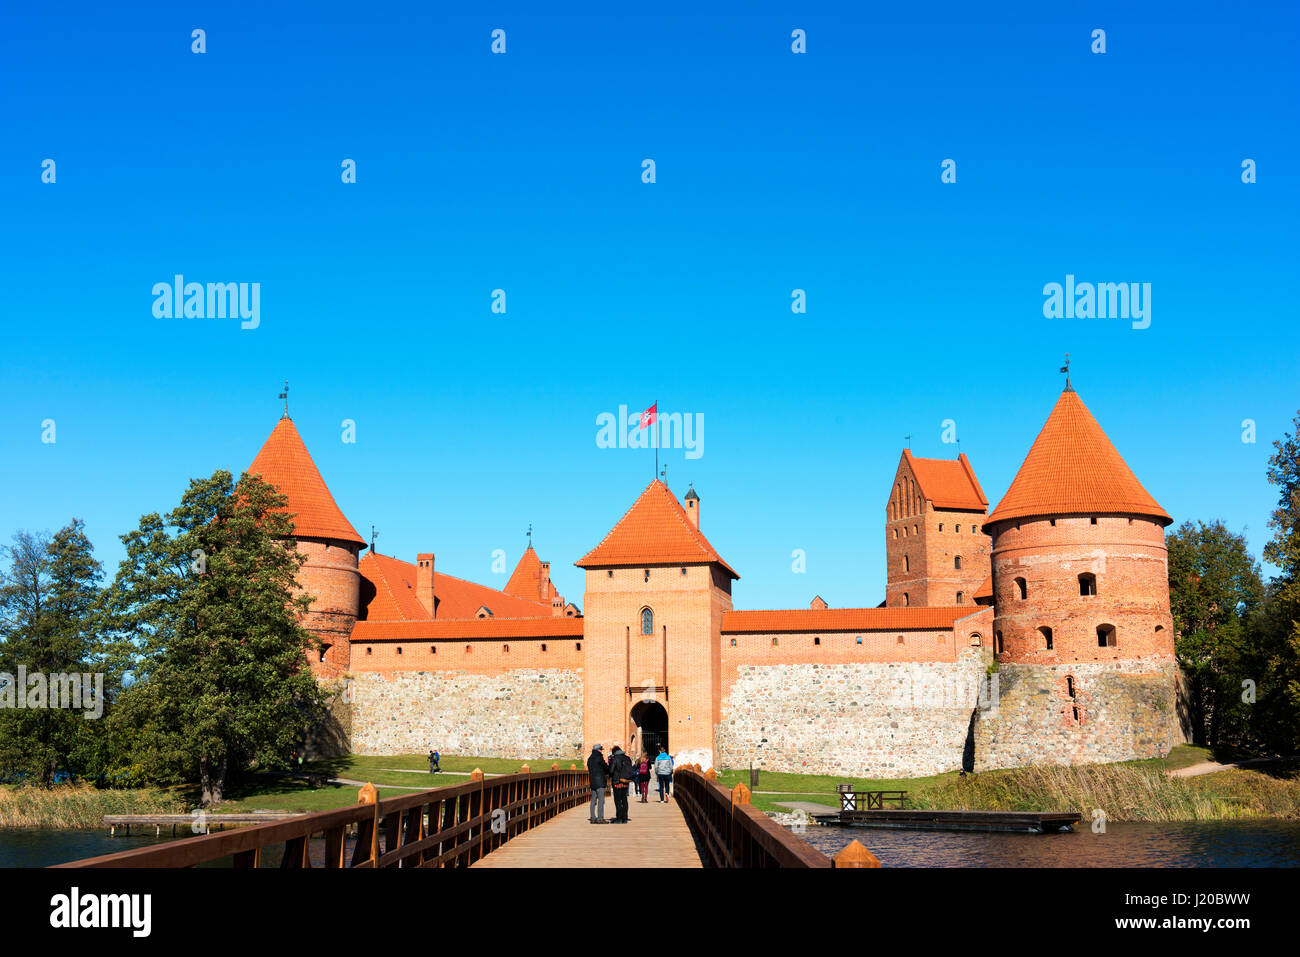 Trakai Island Castle was constructed in the 14th and 15th centuries.  It was one of the main centres of the Grand Duchy of Lithuania. Stock Photo